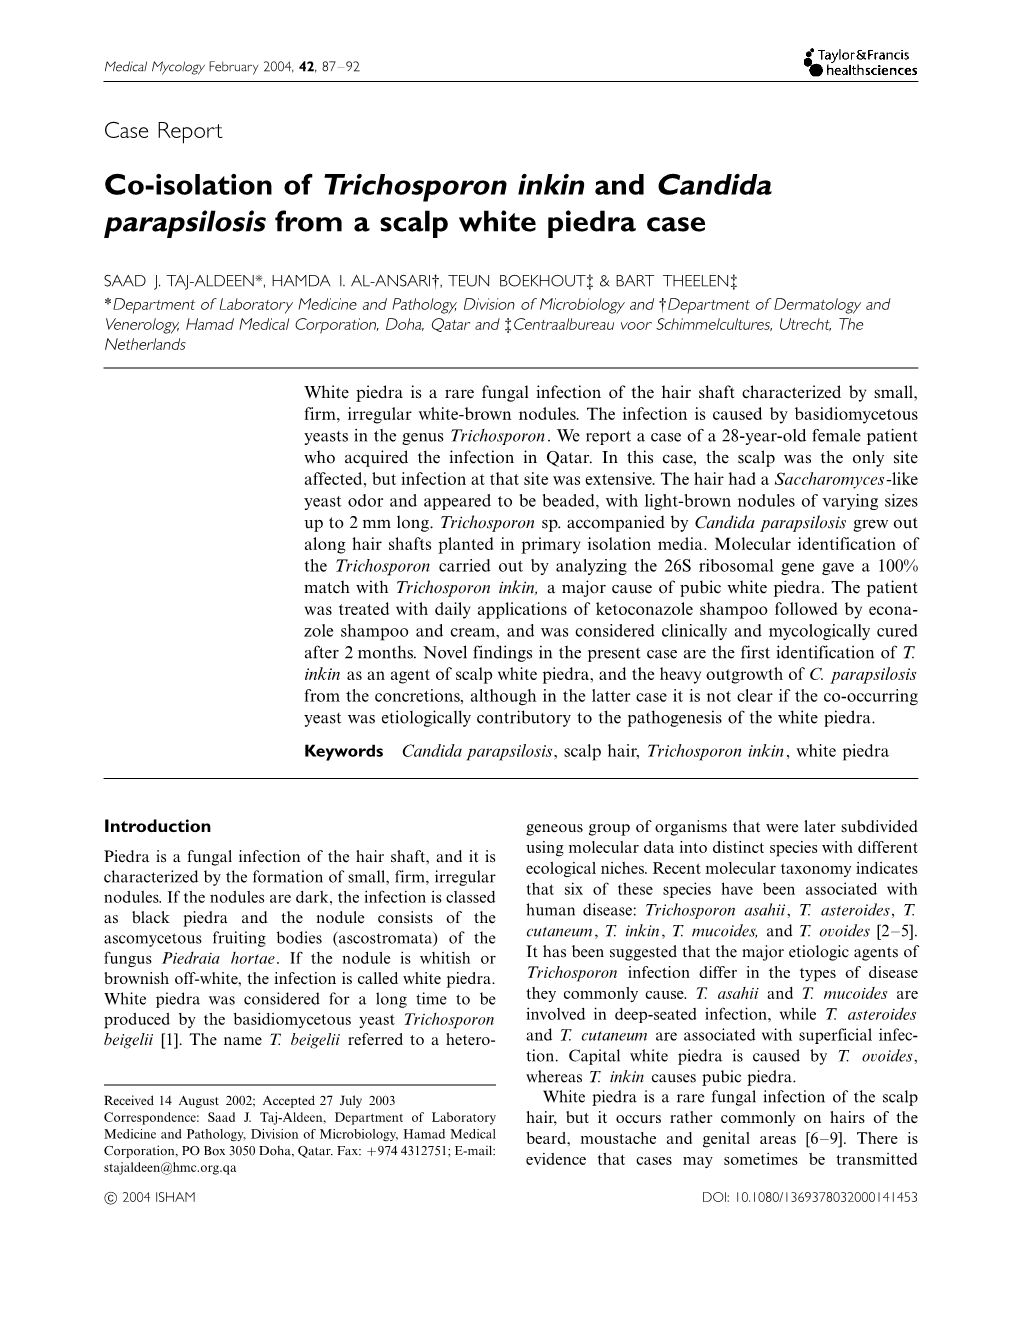 Co-Isolation of Trichosporon Inkin and Candida Parapsilosis from a Scalp White Piedra Case